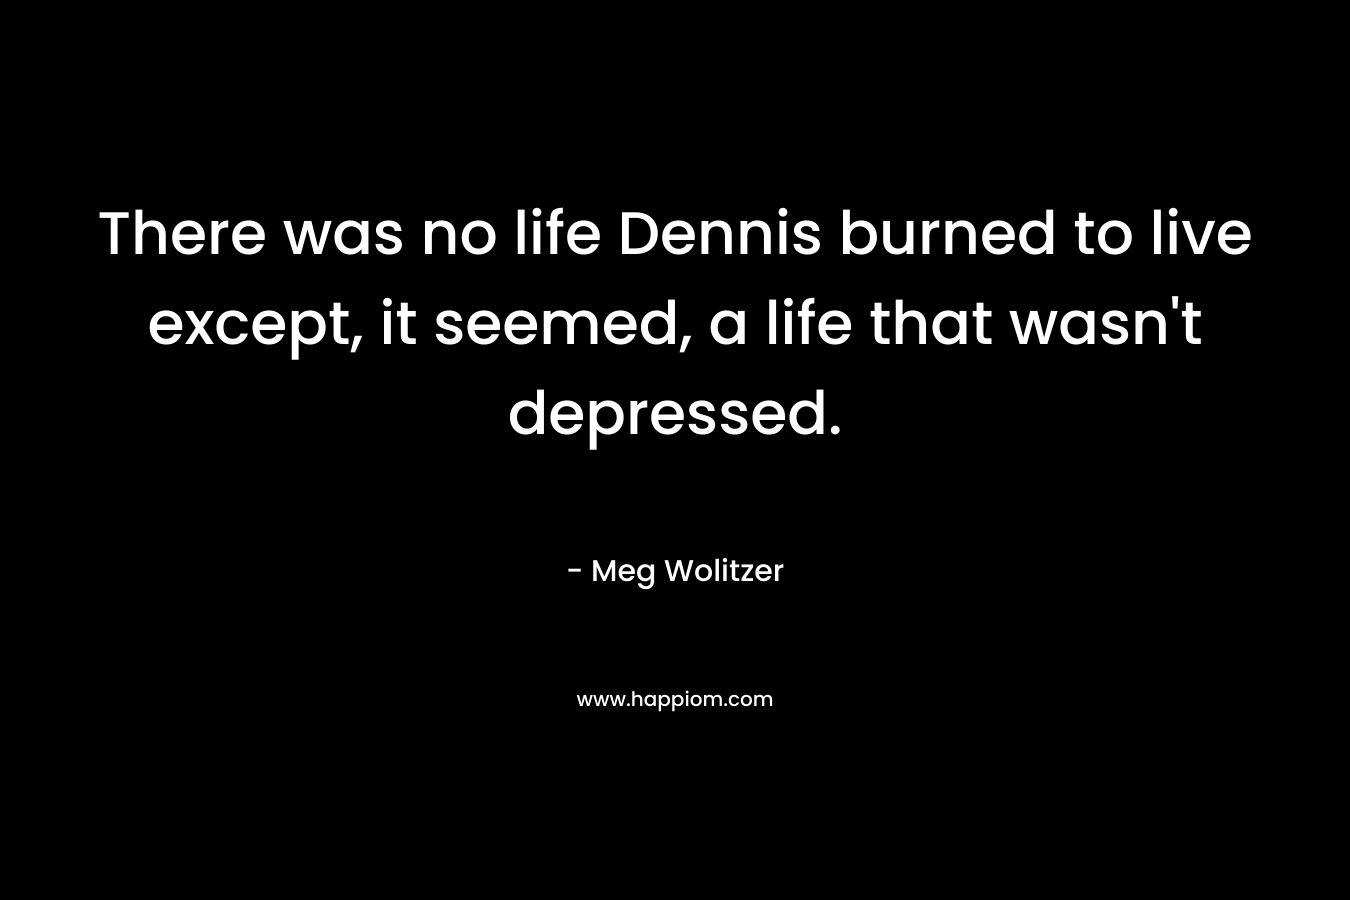 There was no life Dennis burned to live except, it seemed, a life that wasn’t depressed. – Meg Wolitzer